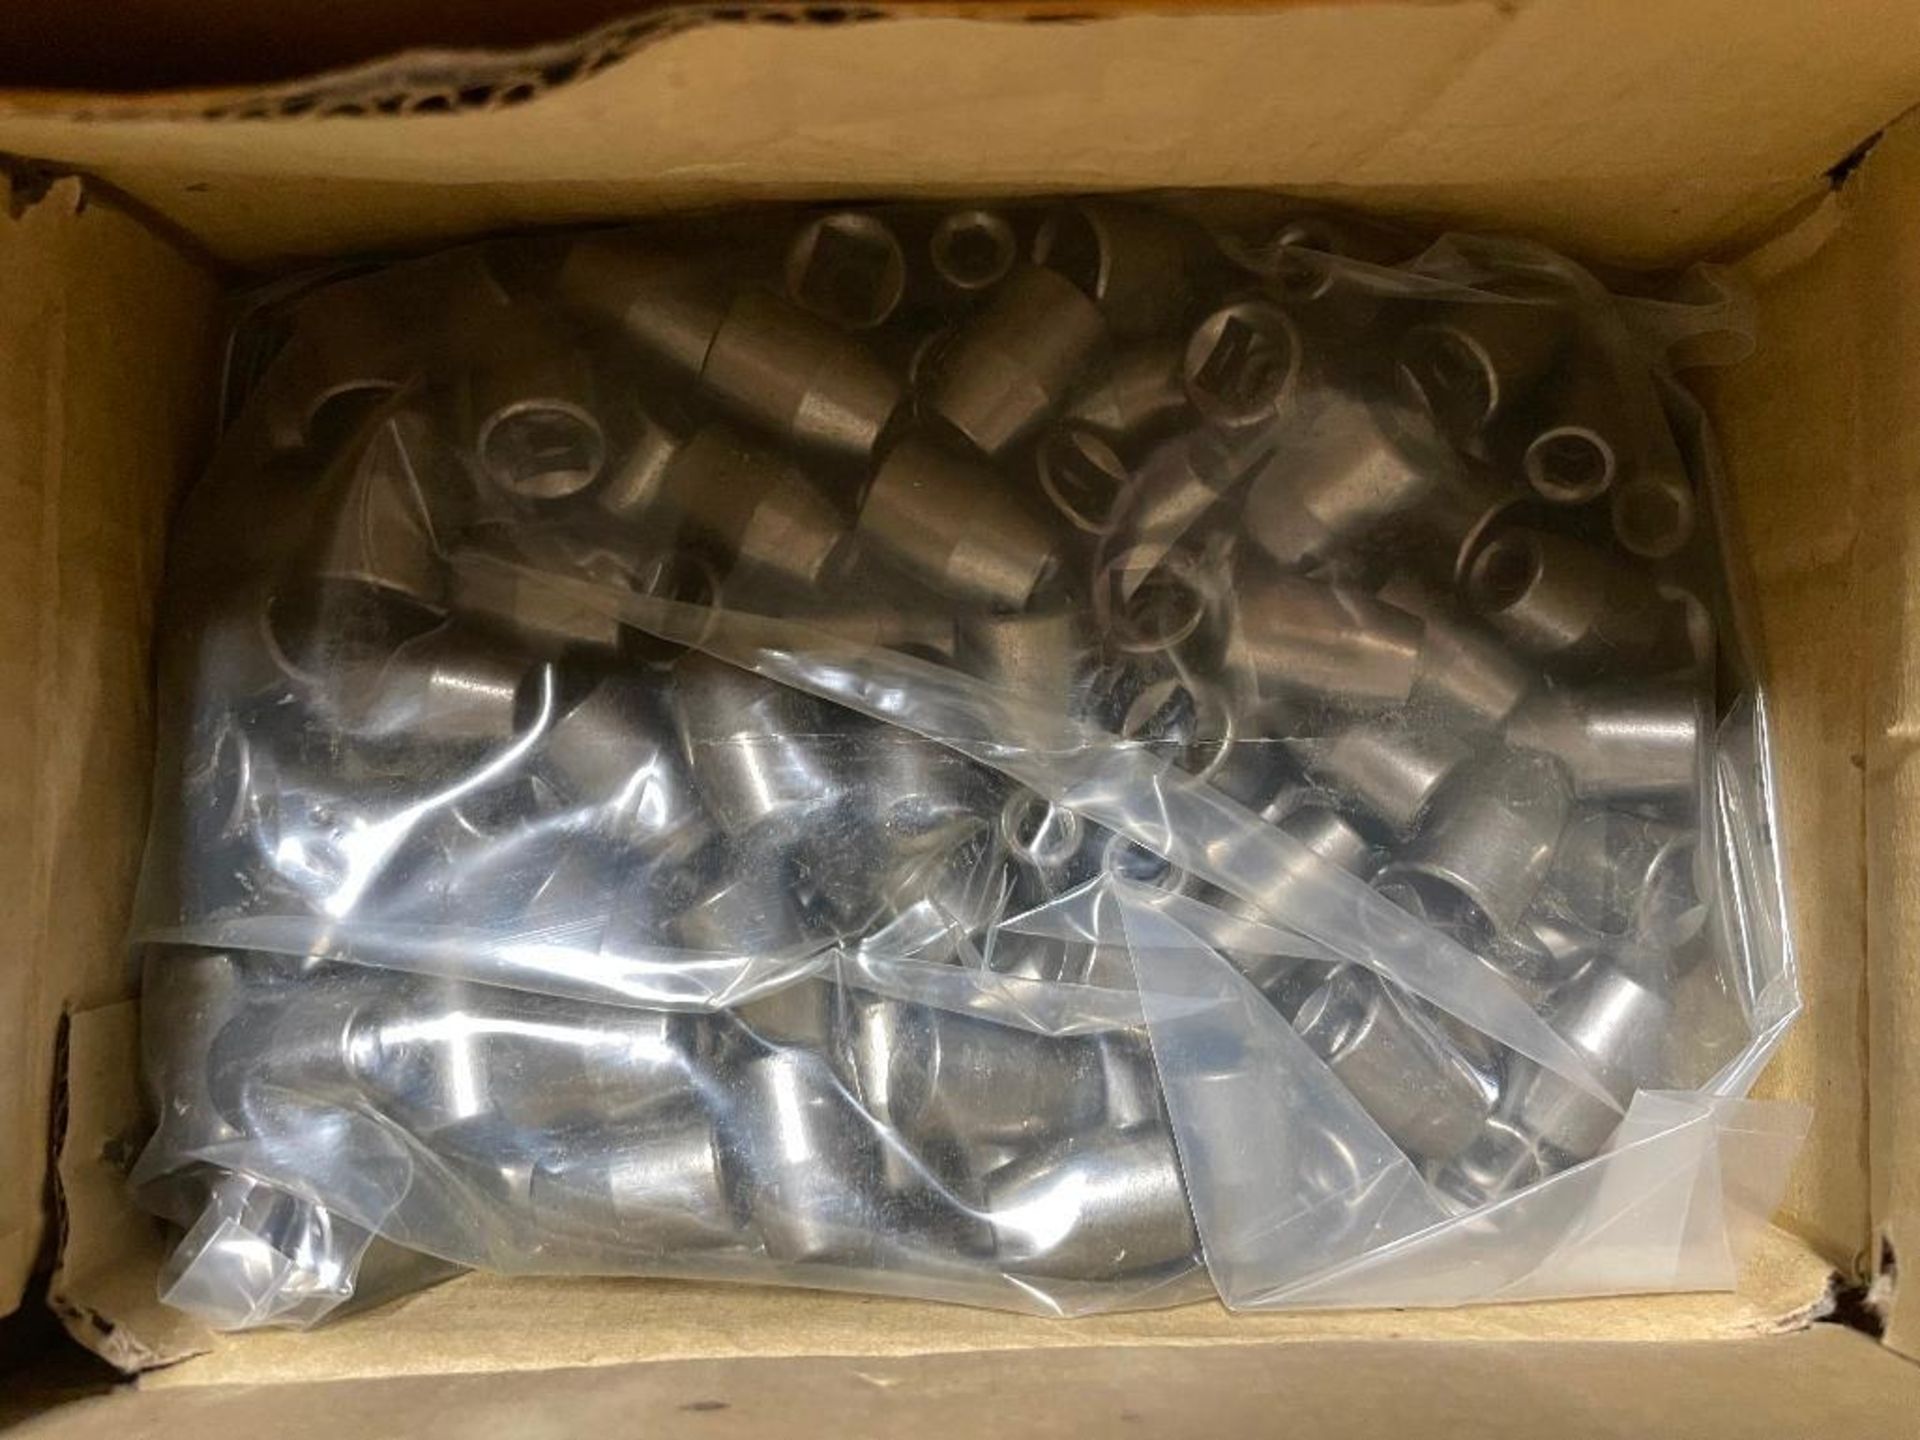 DESCRIPTION: (2) CASES OF 1/4" X 3/8" BIT HOLDERS. 600 PER CASE, 1200 IN LOT THIS LOT IS: ONE MONEY - Image 2 of 6